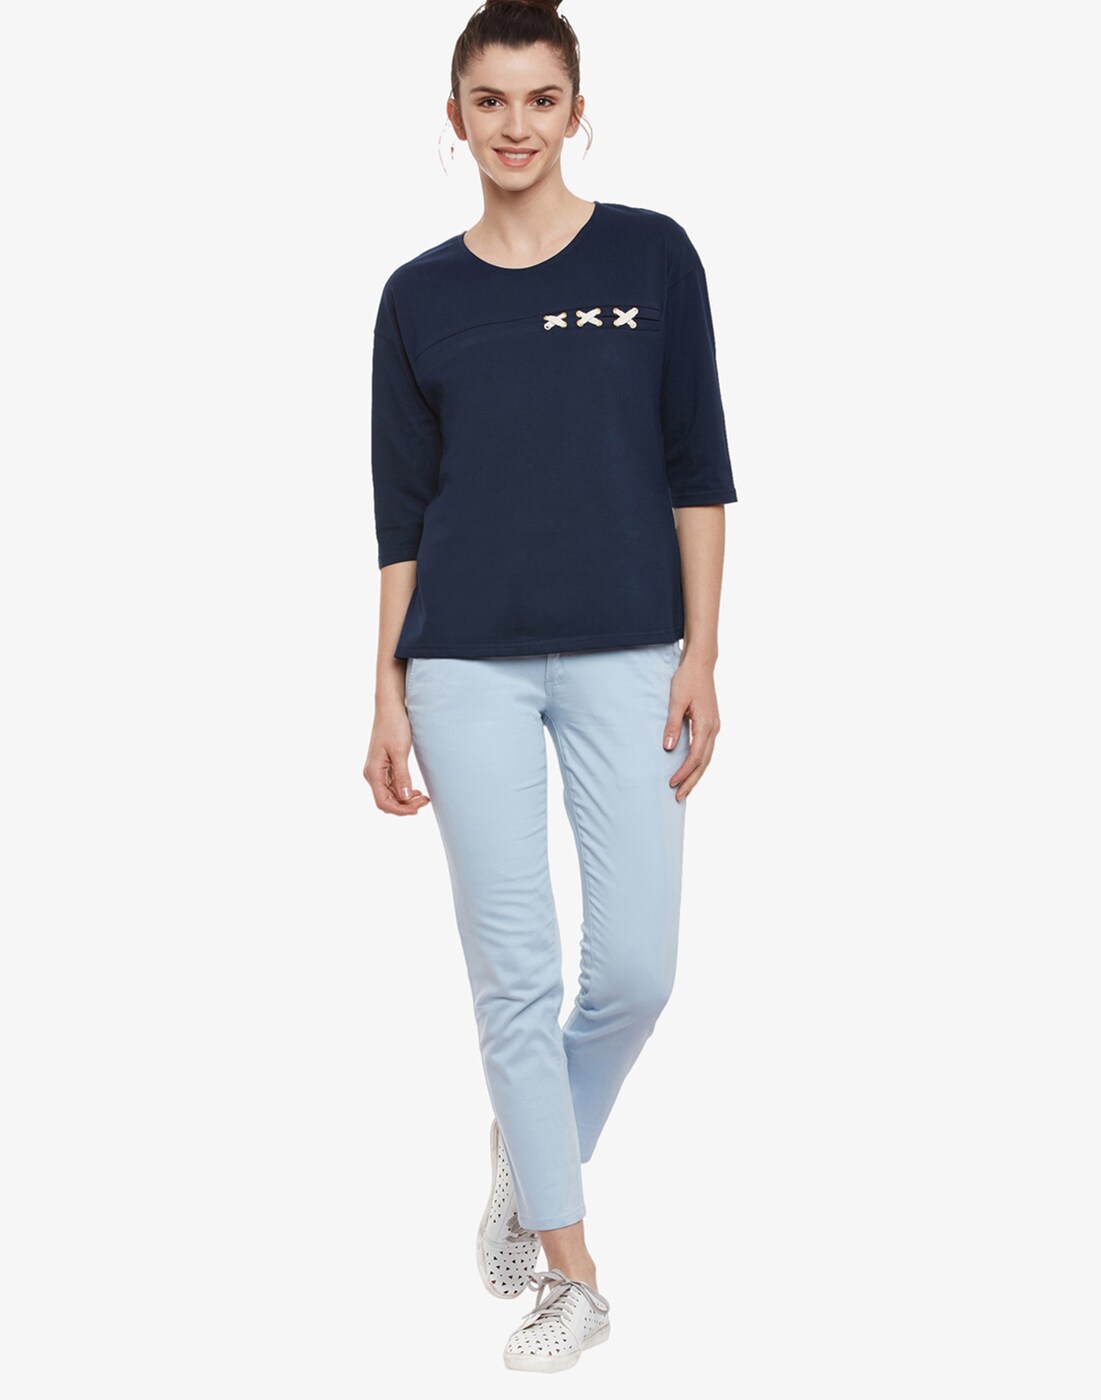 Buy Navy Blue Tops for Women by MISS CHASE Online